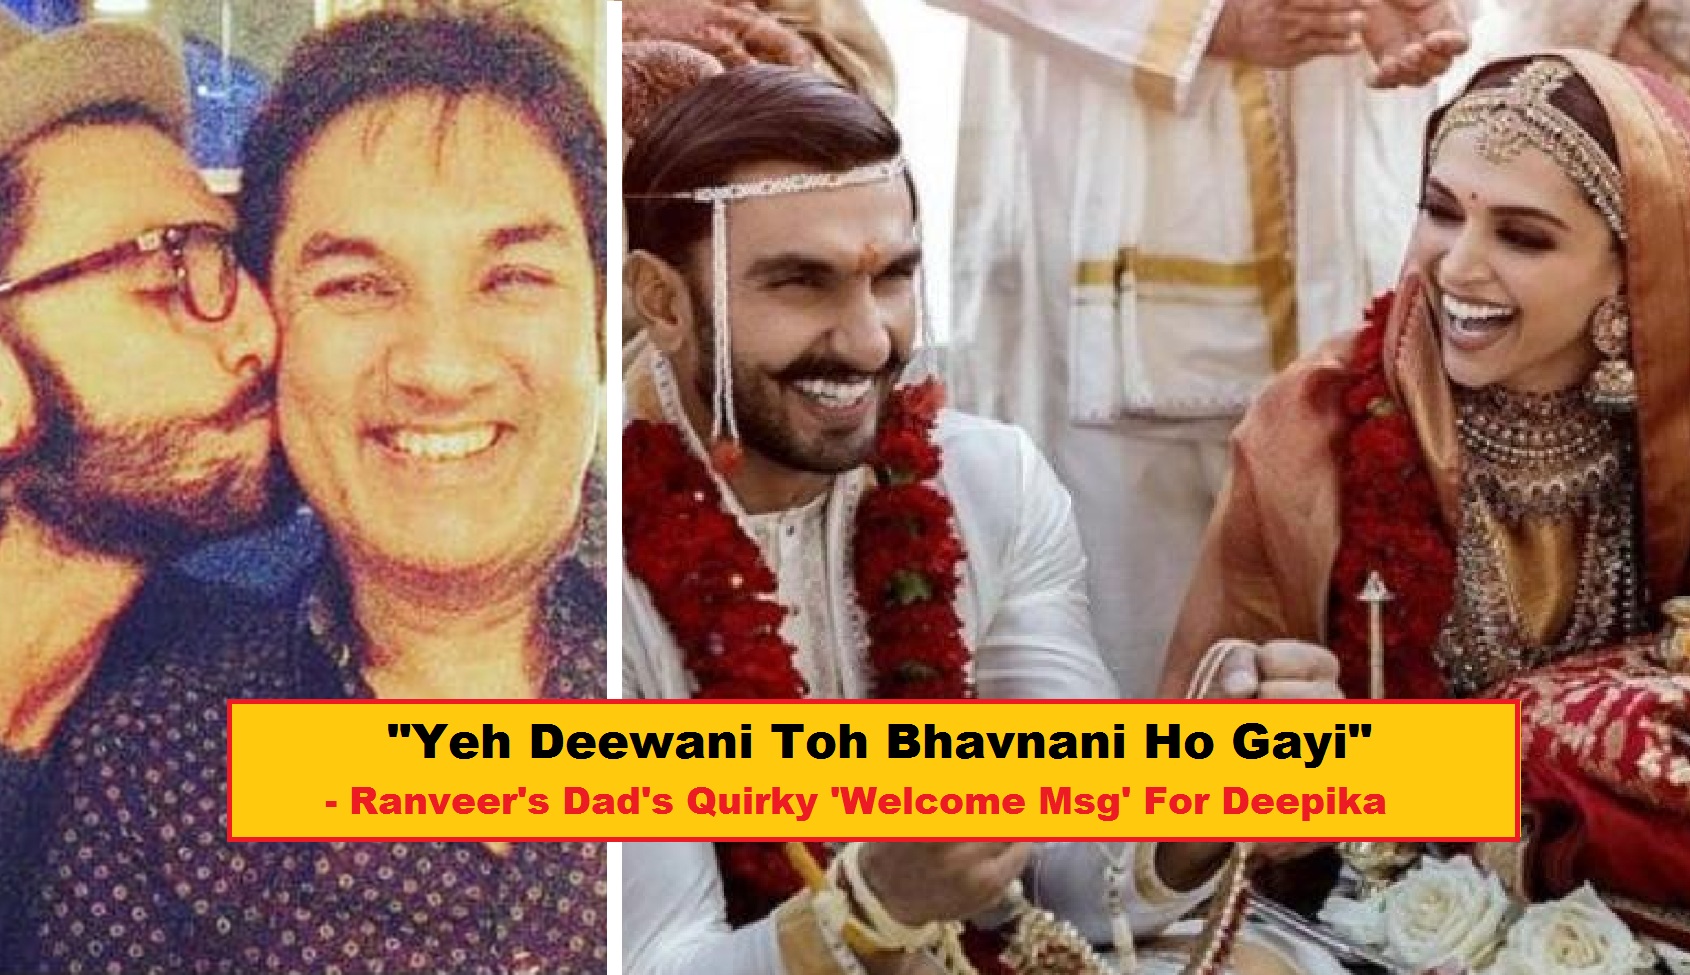 “Yeh Deewani Toh Bhavnani Ho Gayi”, Ranveer’s Father Welcomes Deepika Into Their Family With This Cute Phrase!